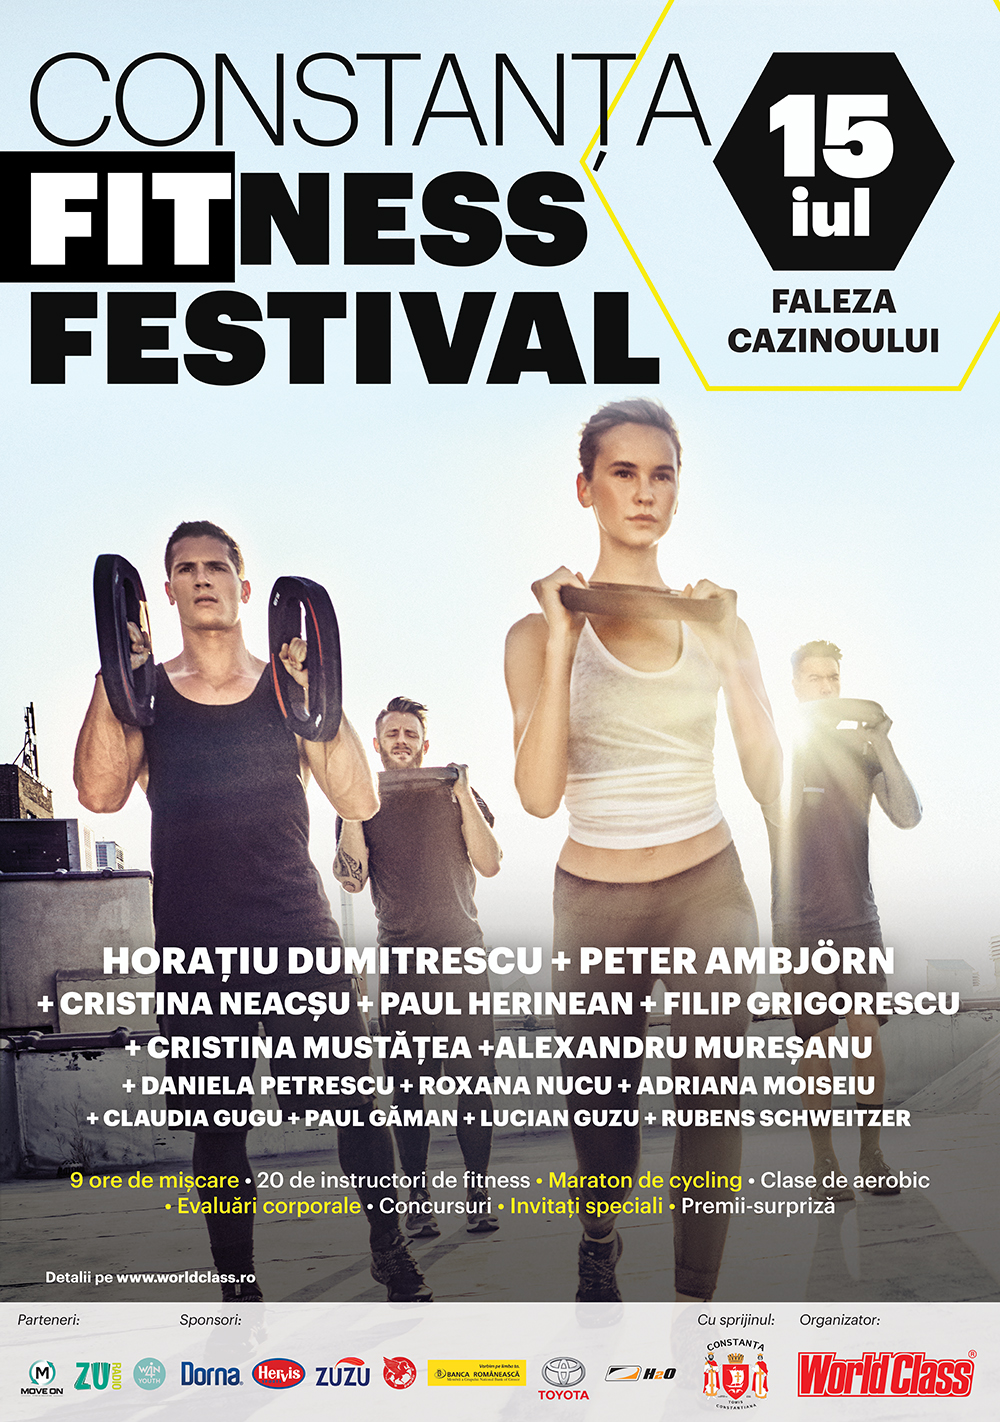 3001_p1109_fitness festival_CT_poster 70x100 _2 fin